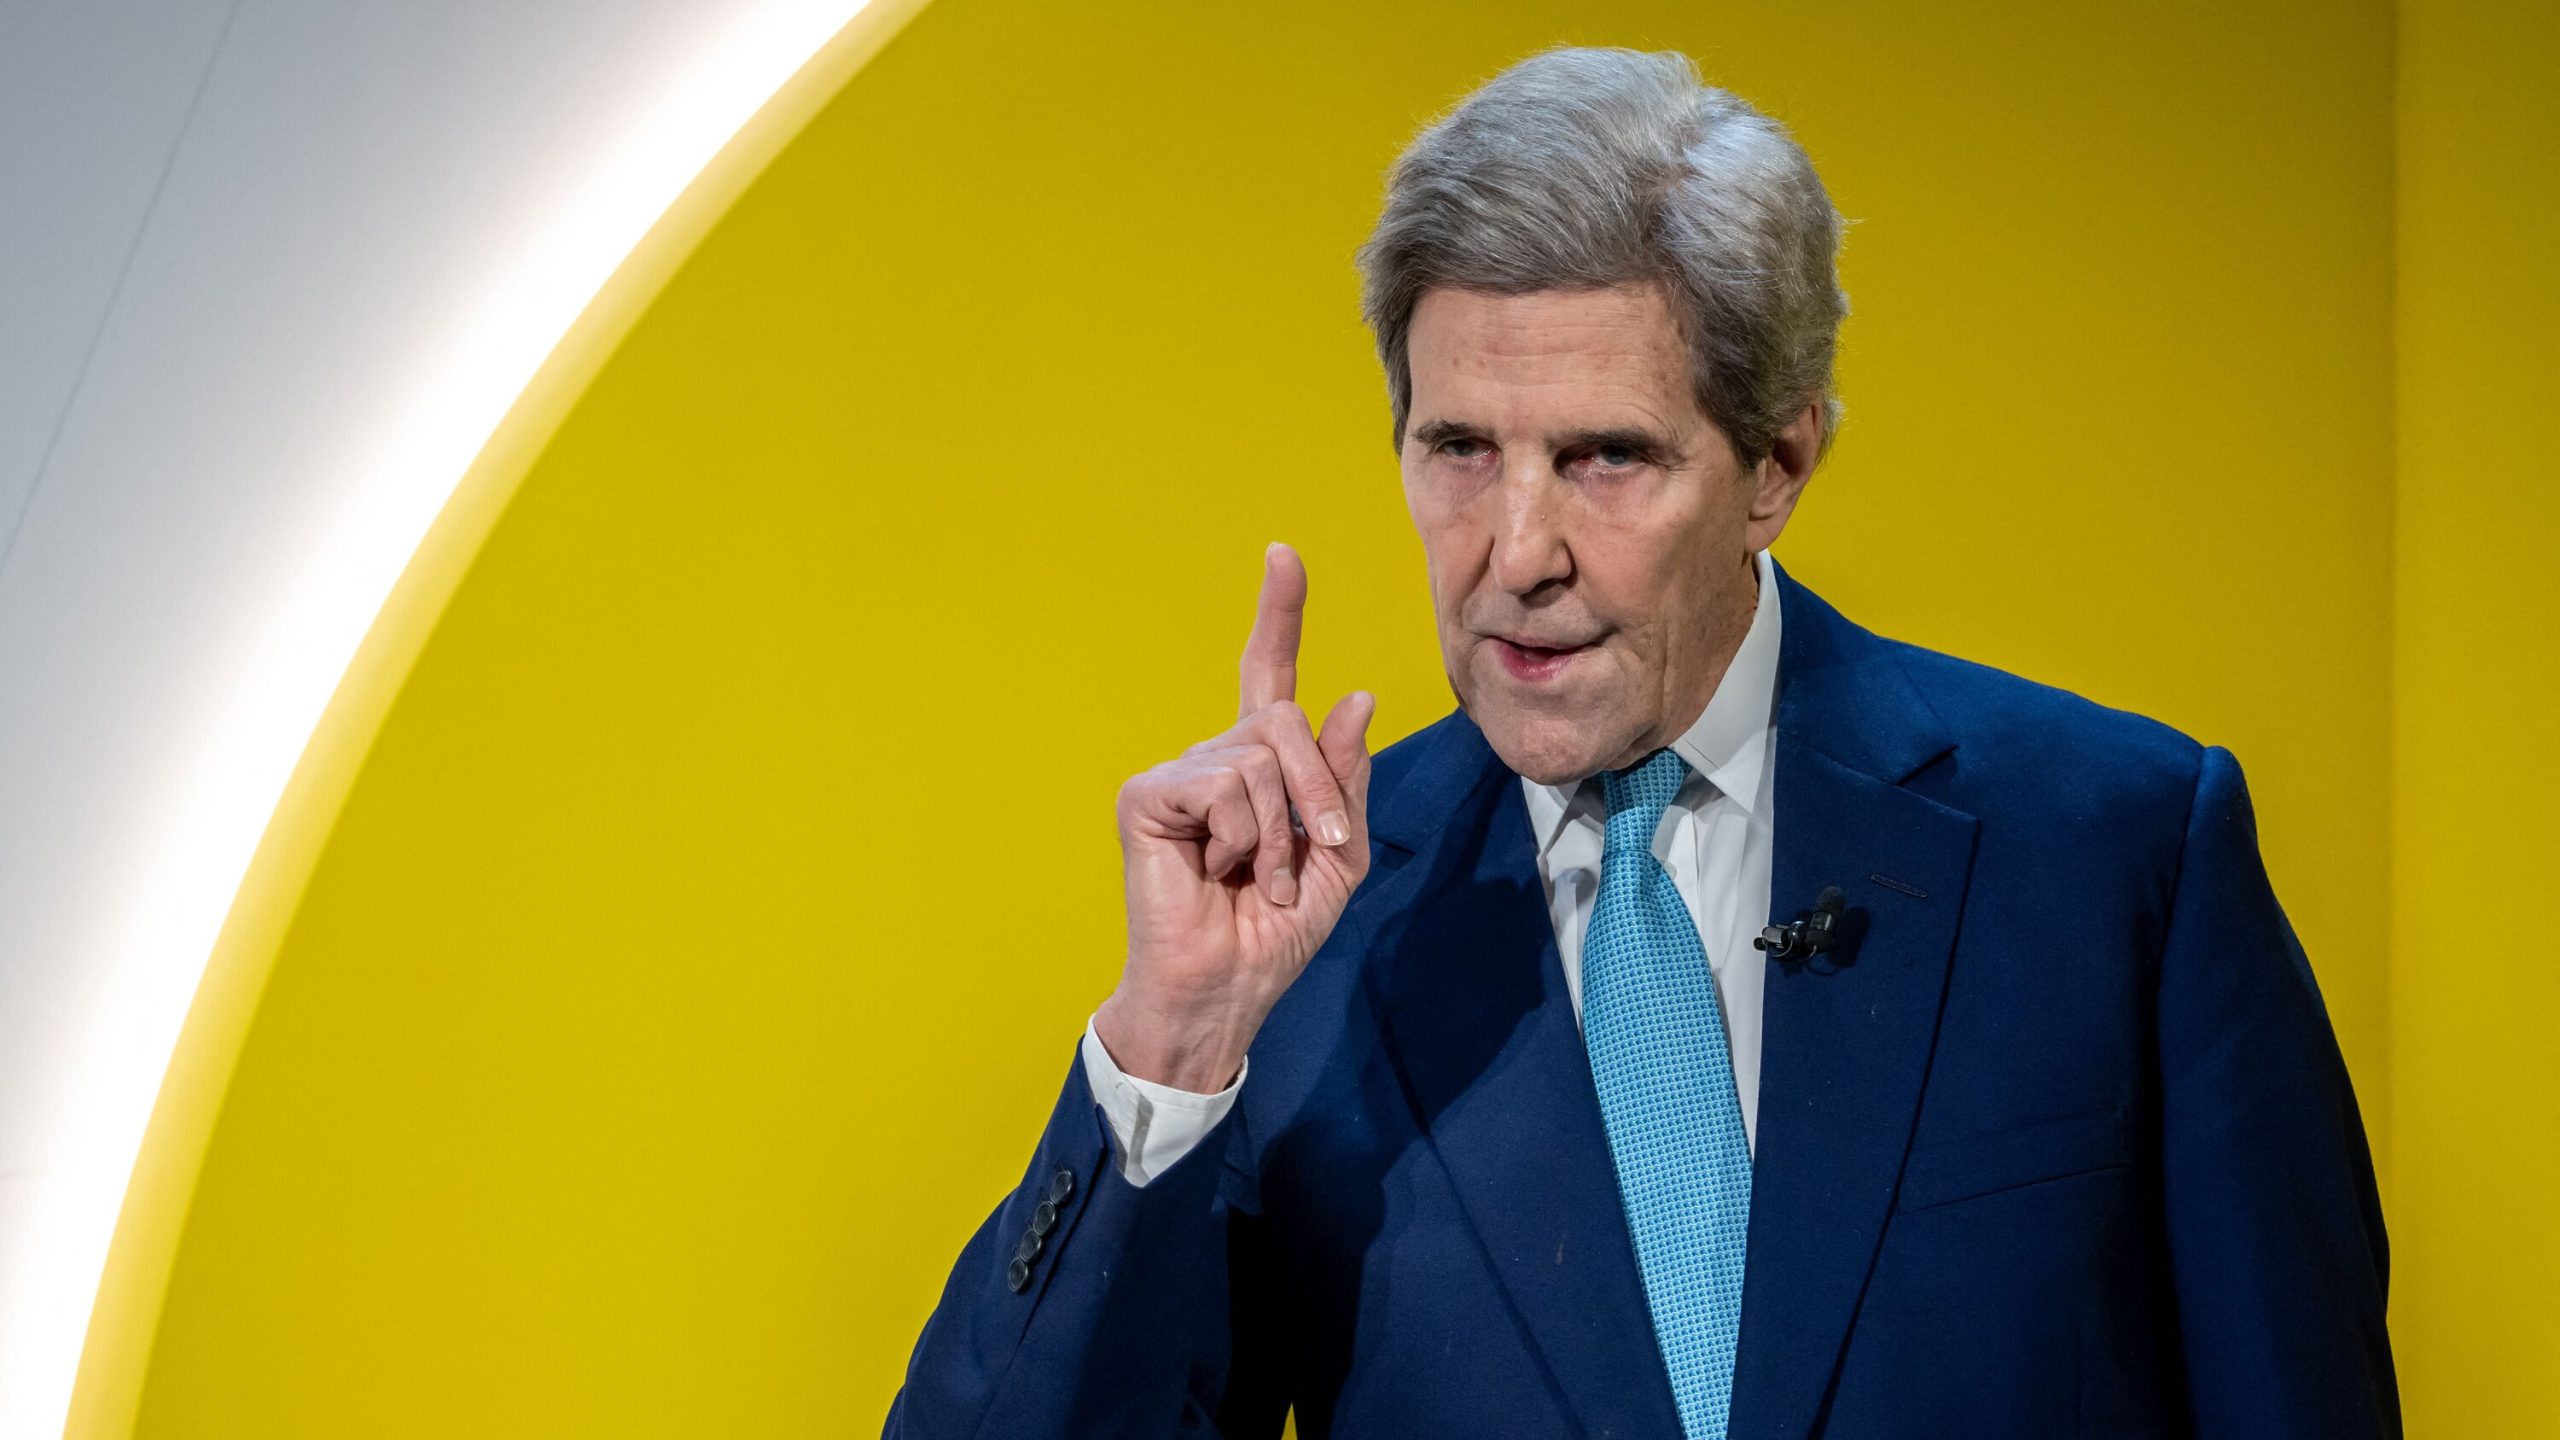 John Kerry Vows to Bankrupt Fossil Fuel Industry, Defying Laws and Ethics to Execute WEF’s Net Zero Agenda